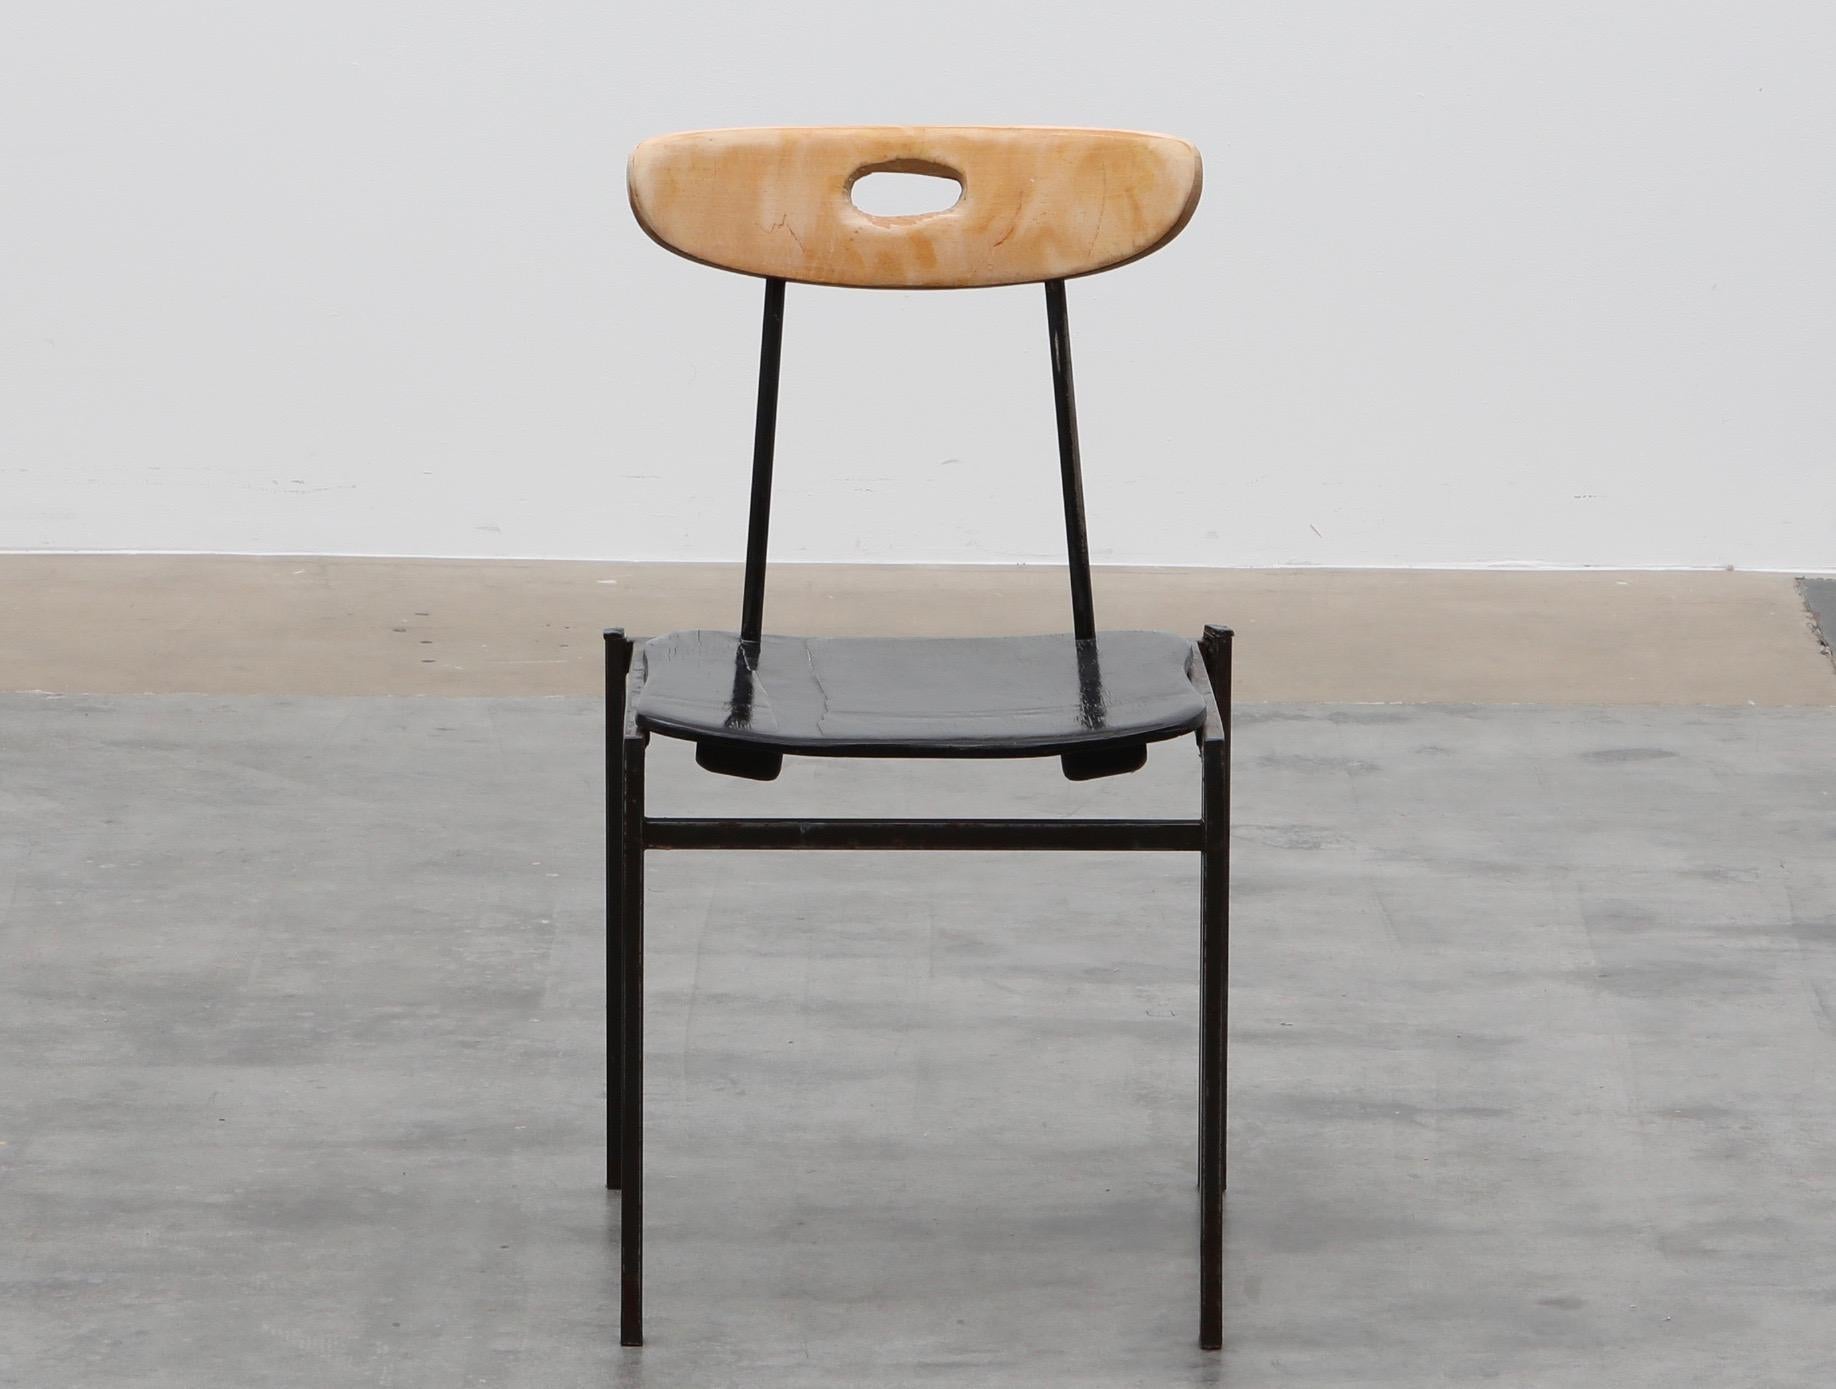 20th Century Untitled Chair by Markus Friedrich Staab from the Black Is Beautiful Series